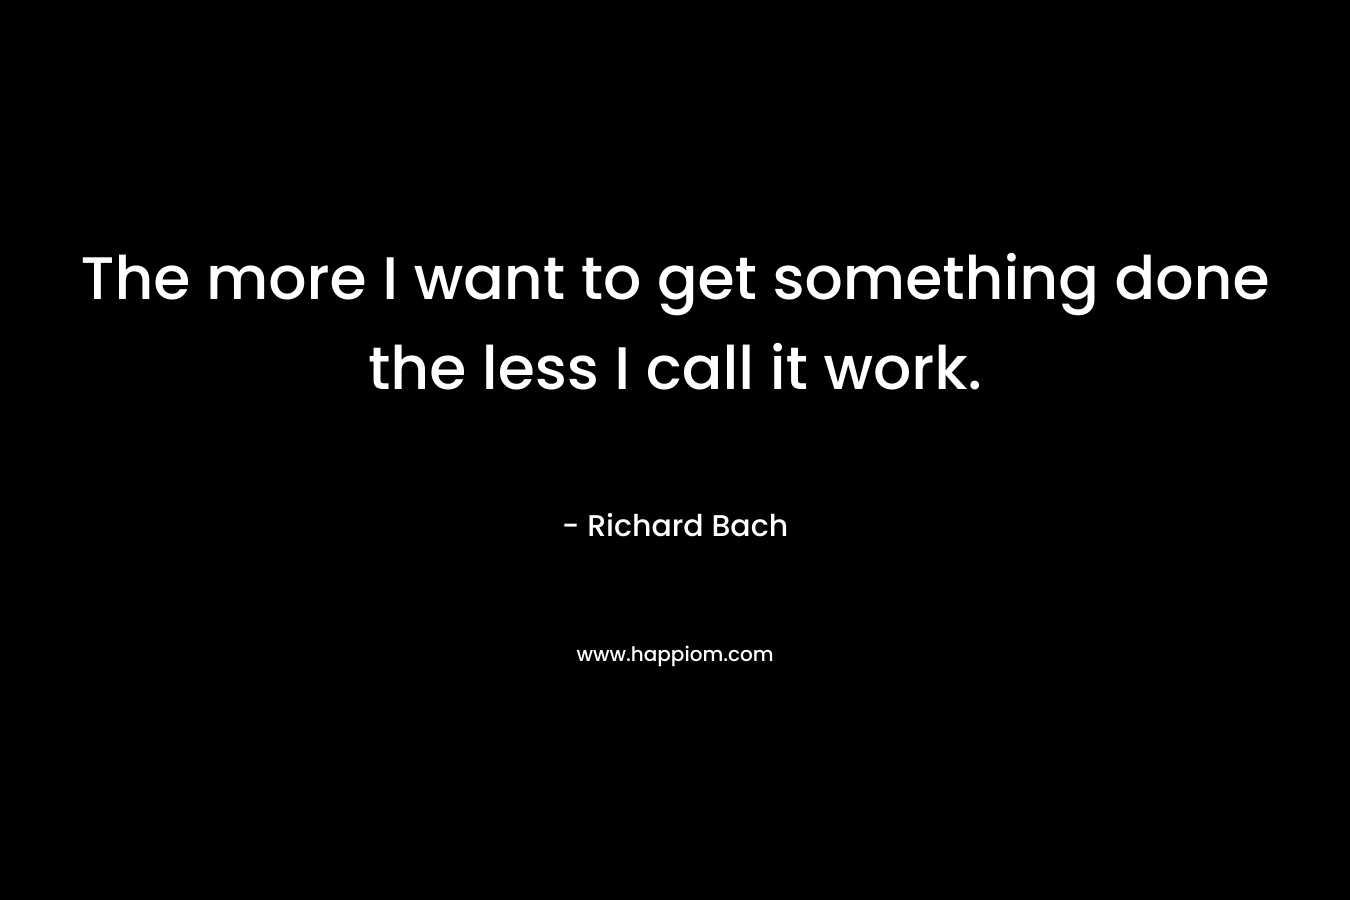 The more I want to get something done the less I call it work. – Richard Bach